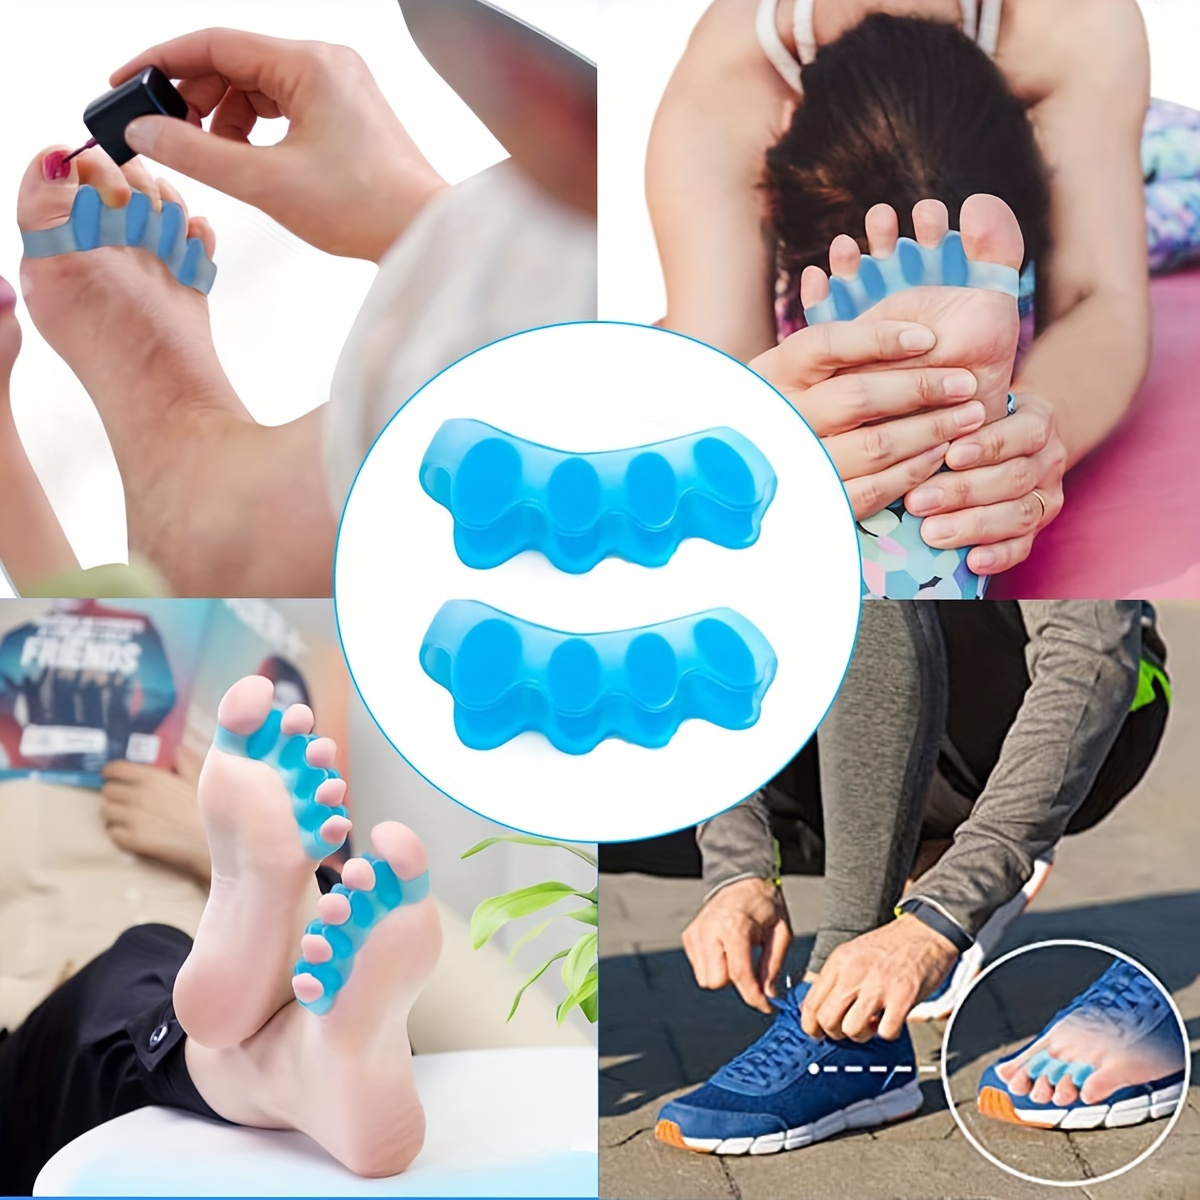 

Toe Separators For Overlapping Toes, 1 Pair Silicone Toe Relaxation Clamp, Unisex Toe Sheath Protector, Alcohol-free